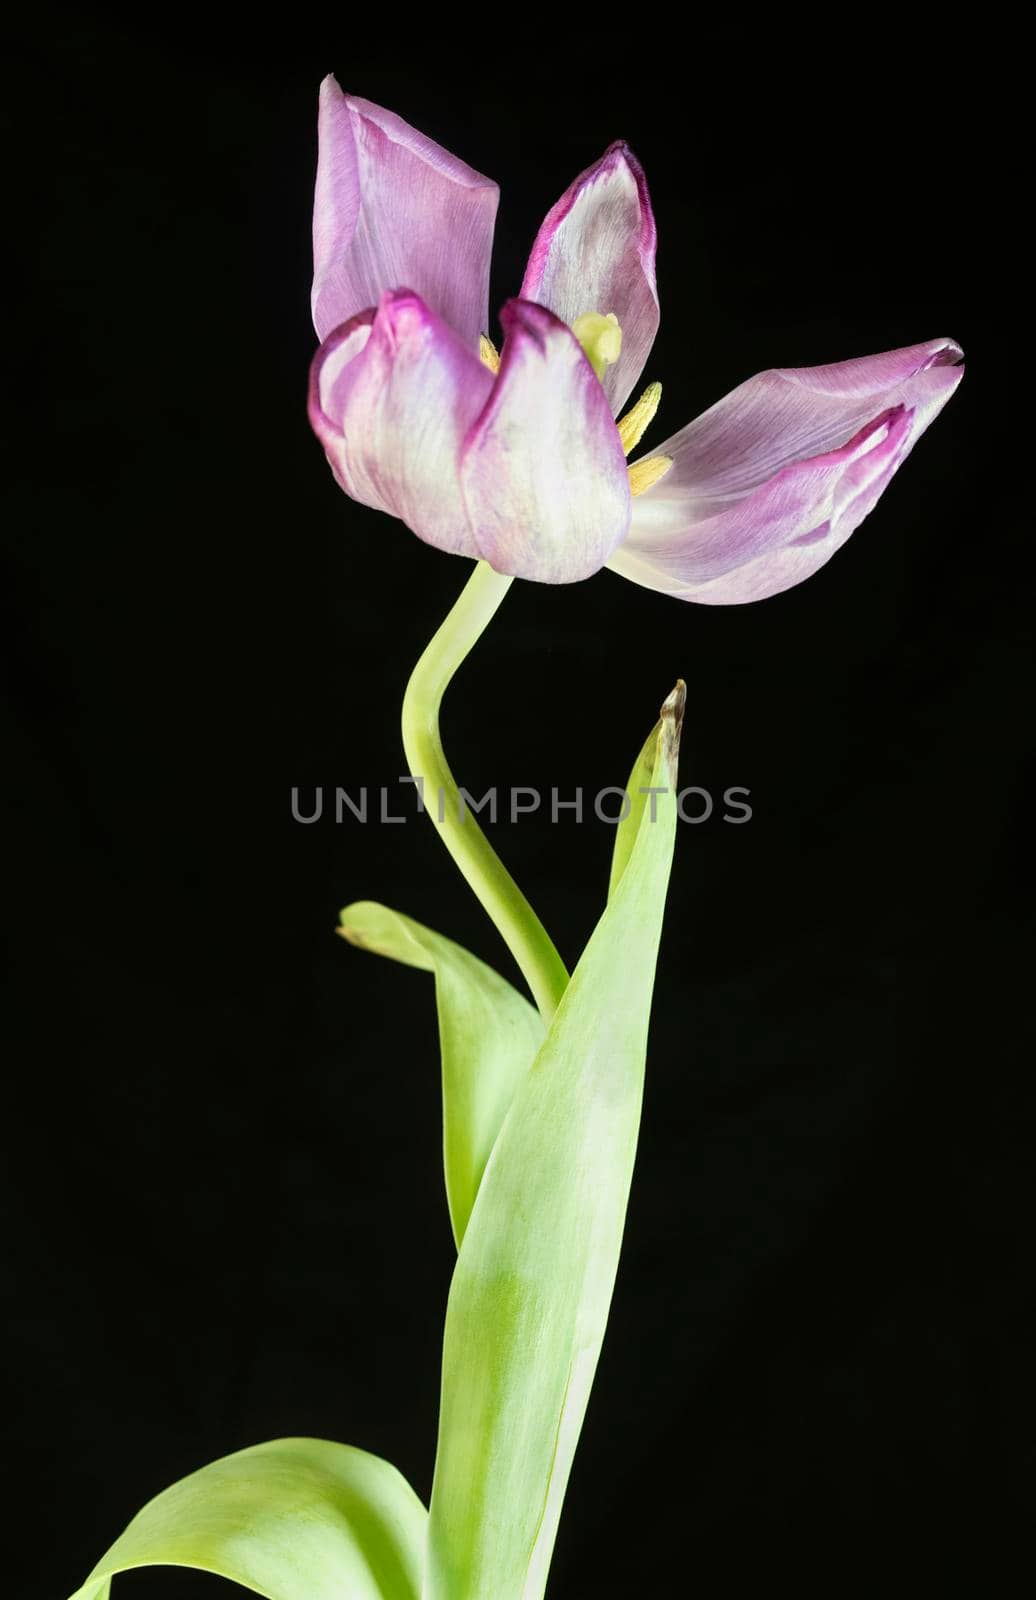 One pink and white tulip in bloom on black background , beautiful green stem with leaves